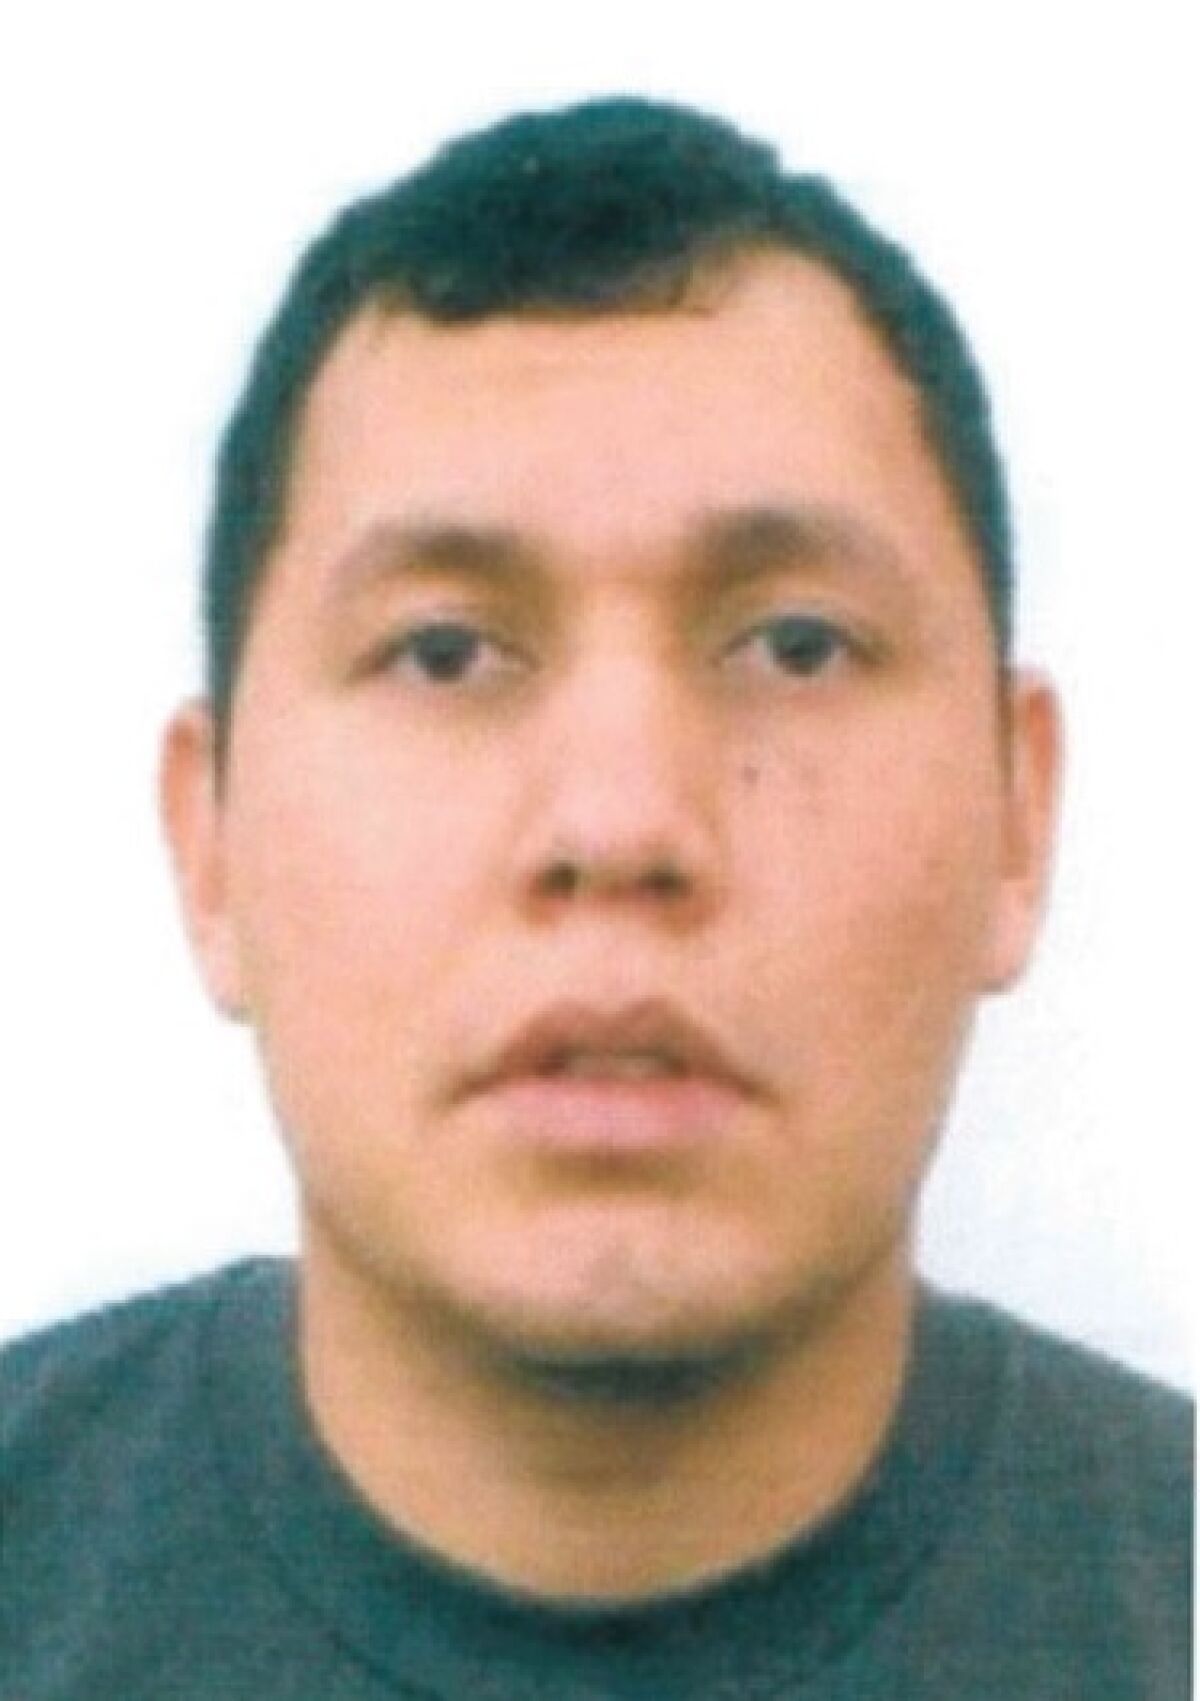 Authorities in Mexico and U.S. say Bryant Rivera, 30, of Downey, is suspect in killing of three sex workers in Tijuana.